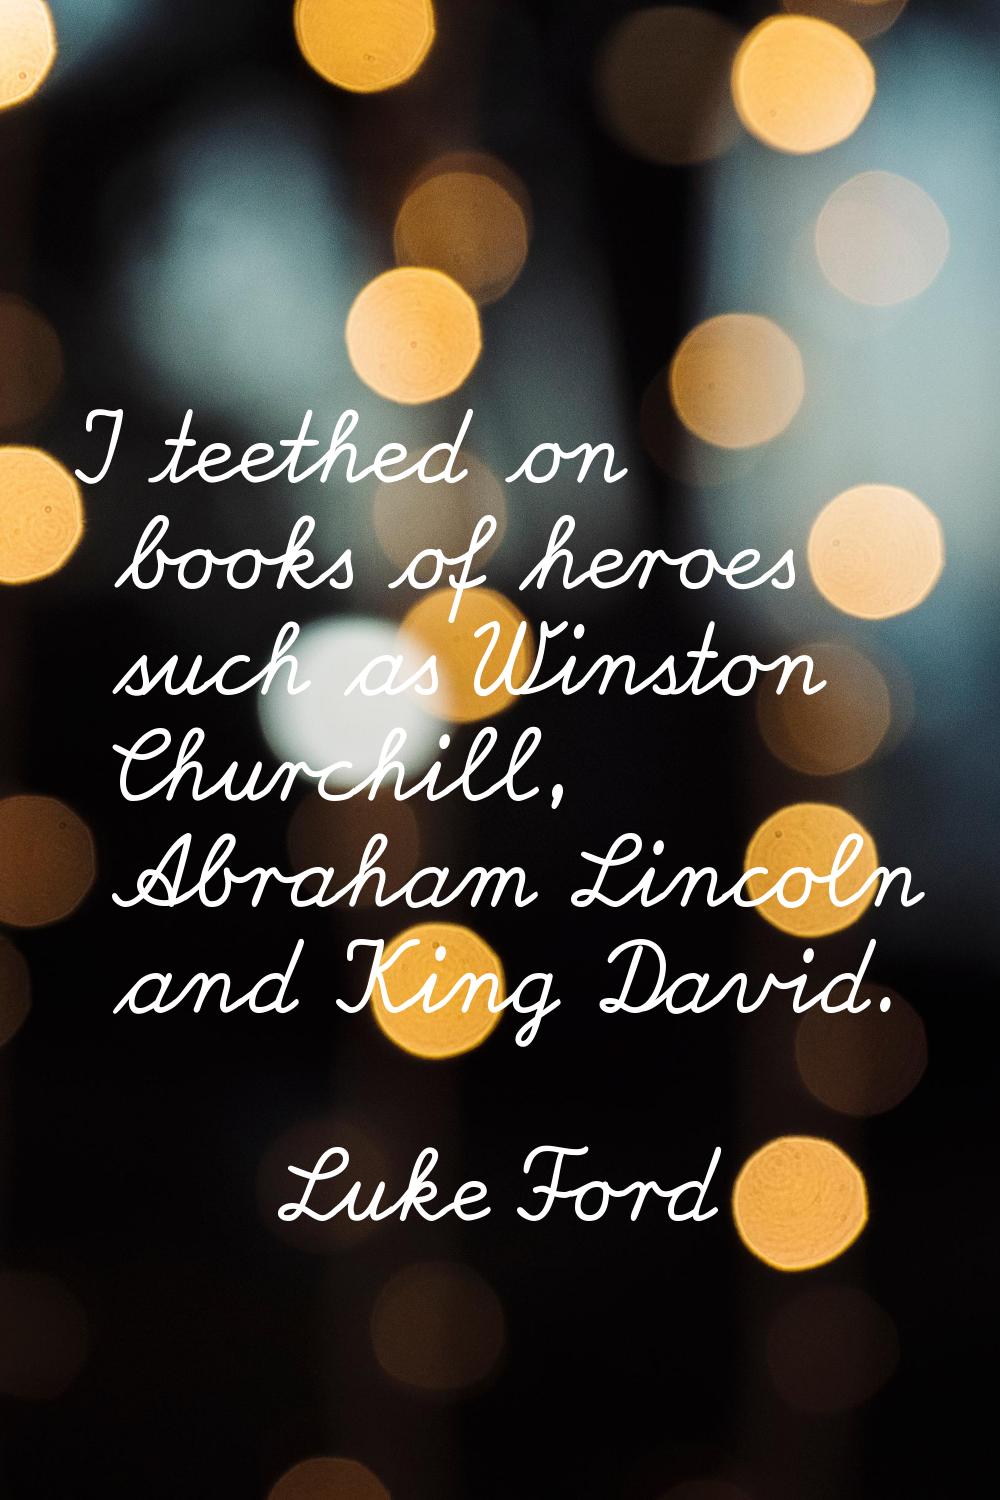 I teethed on books of heroes such as Winston Churchill, Abraham Lincoln and King David.